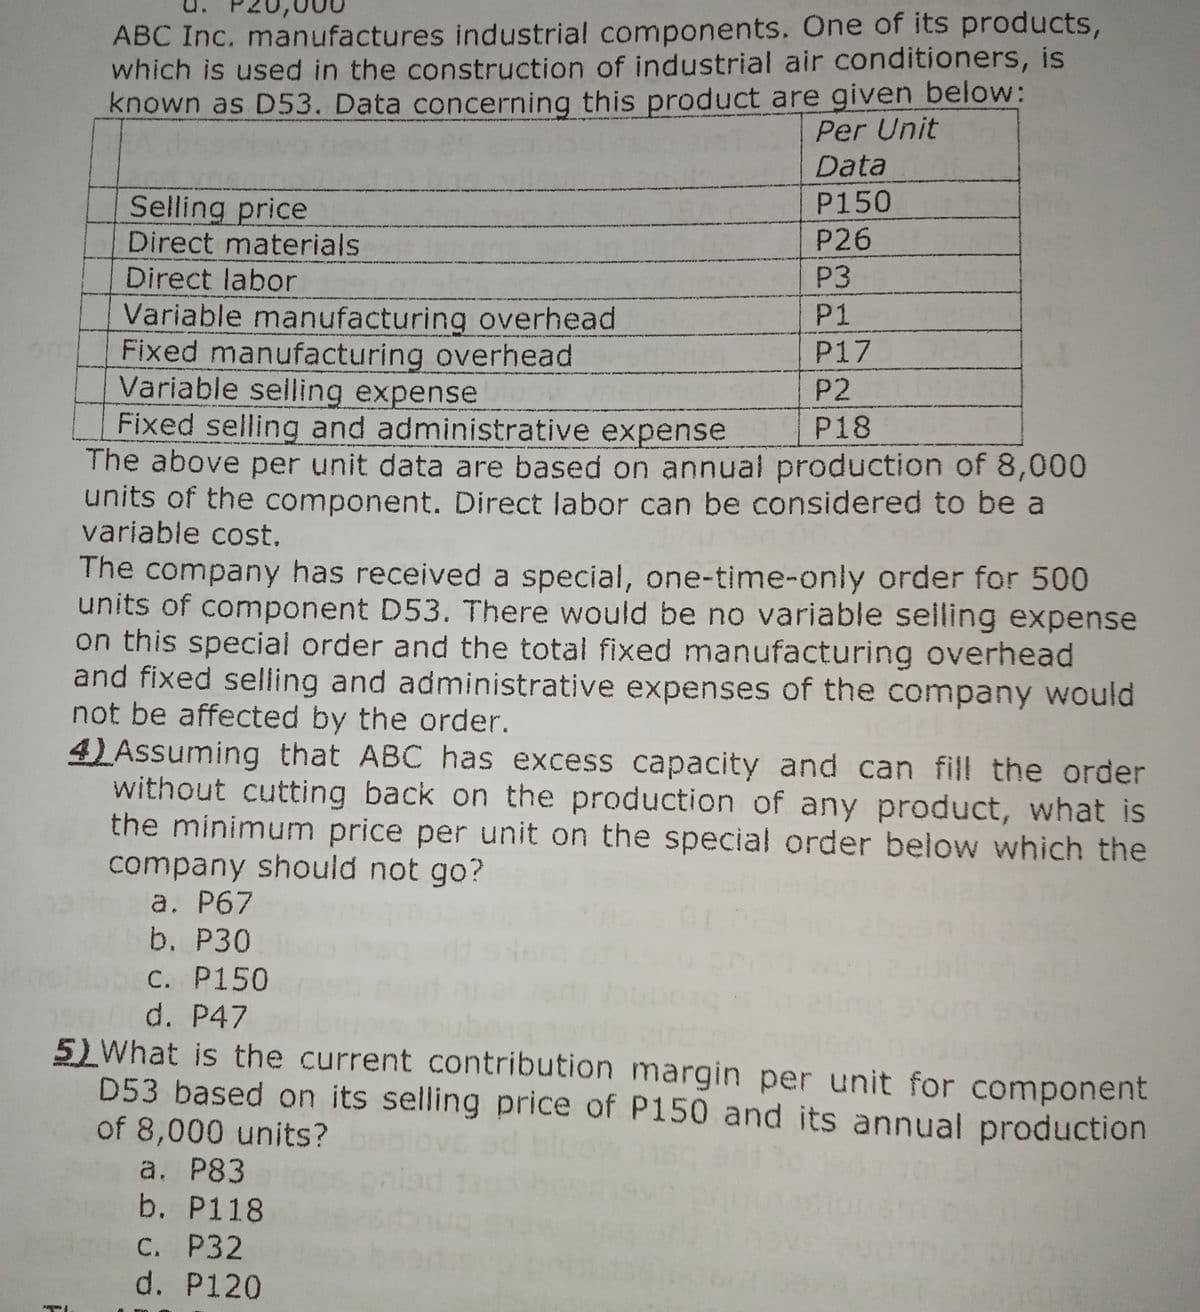 ABC Inc. manufactures industrial components. One of its products,
which is used in the construction of industrial air conditioners, is
known as D53. Data concerning this product are given below:
Per Unit
Data
Selling price
P150
Direct materials
P26
Direct labor
P3
P1
Variable manufacturing overhead
Fixed manufacturing overhead
Variable seilling expense
Fixed selling and administrative expense
The above per unit data are based on annual production of 8,000
units of the component. Direct labor can be considered to be a
variable cost.
P17
P2
P18
The company has received a special, one-time-only order for 500
units of component D53. There would be no variable selling expense
on this special order and the total fixed manufacturing overhead
and fixed selling and administrative expenses of the company would
not be affected by the order.
4) Assuming that ABC has excess capacity and can fill the order
without cutting back on the production of any product, what is
the minimum price per unit on the special order below which the
company should not go?
a. P67
b. P30
C. P150
d. P47
5)What is the current contribution margin per unit for component
D53 based on its selling price of P150 and its annual production
of 8,000 units?
a. P83
b. P118
С. Р32
d. P120
